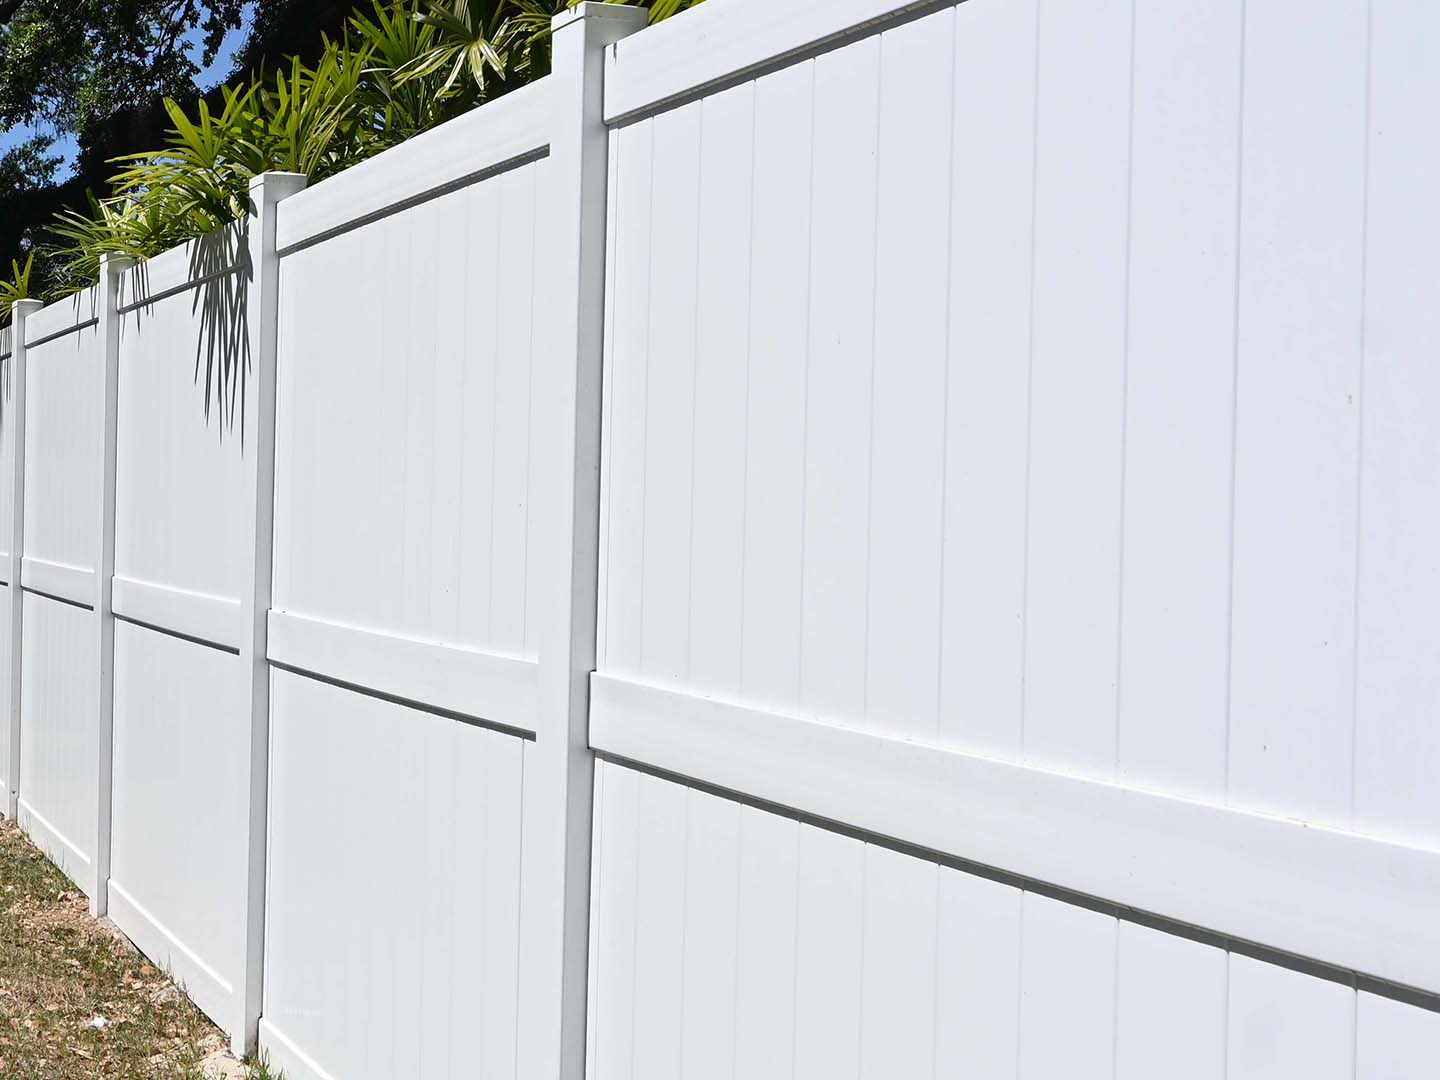 Photo of a Tampa, FL vinyl fence.